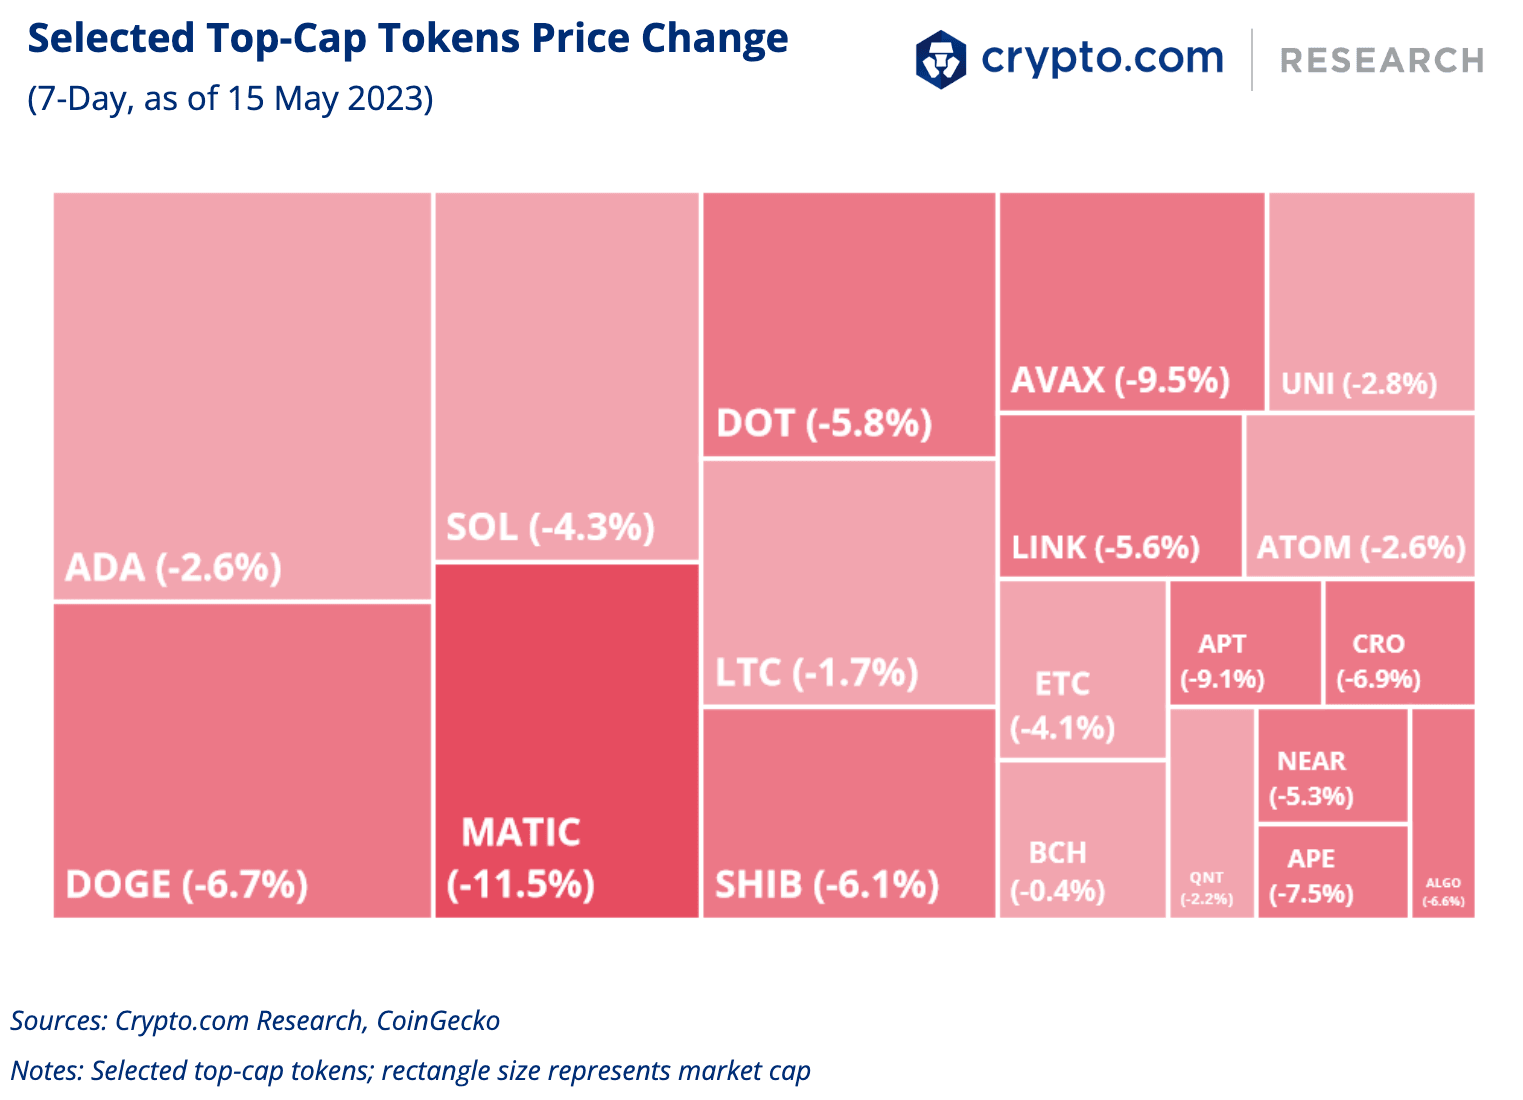 Selected Top Cap Tokens Price Change 15 May